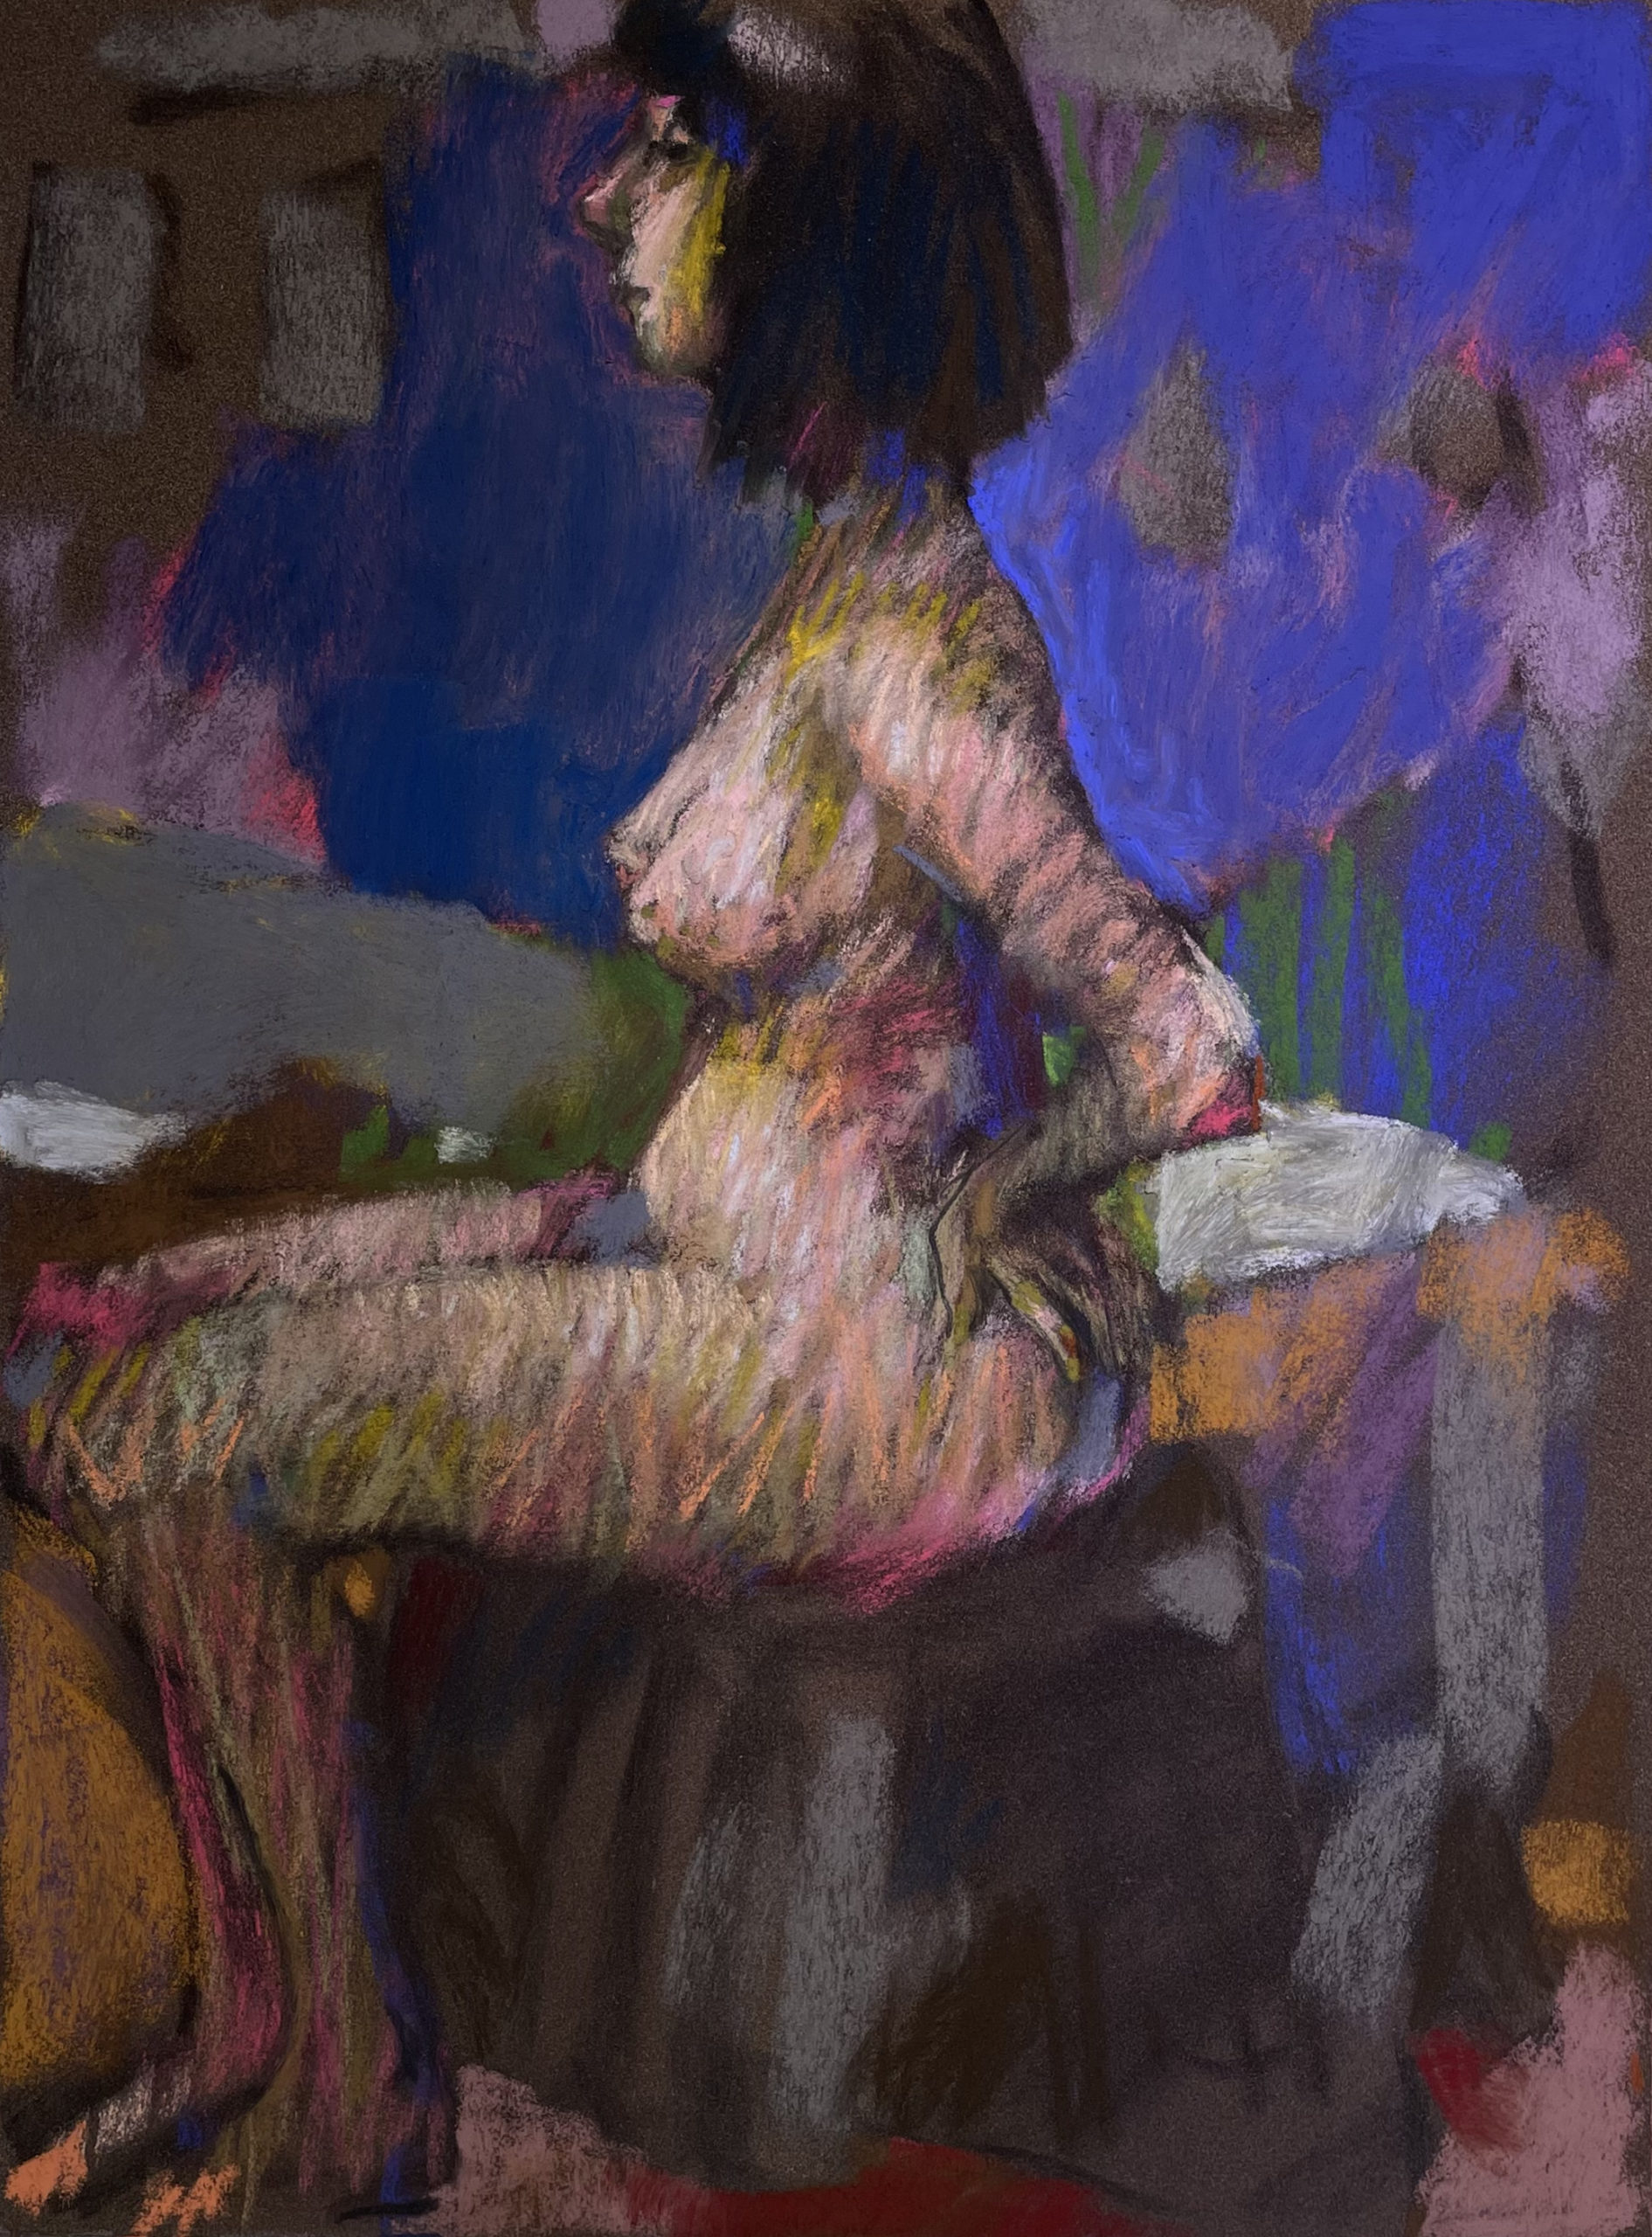 Influence of Matisse's "Woman With a Hat": Casey Klahn, "Nude in an Interior, Side Pose, Seated on an Ottoman," 2022, pastel on paper.